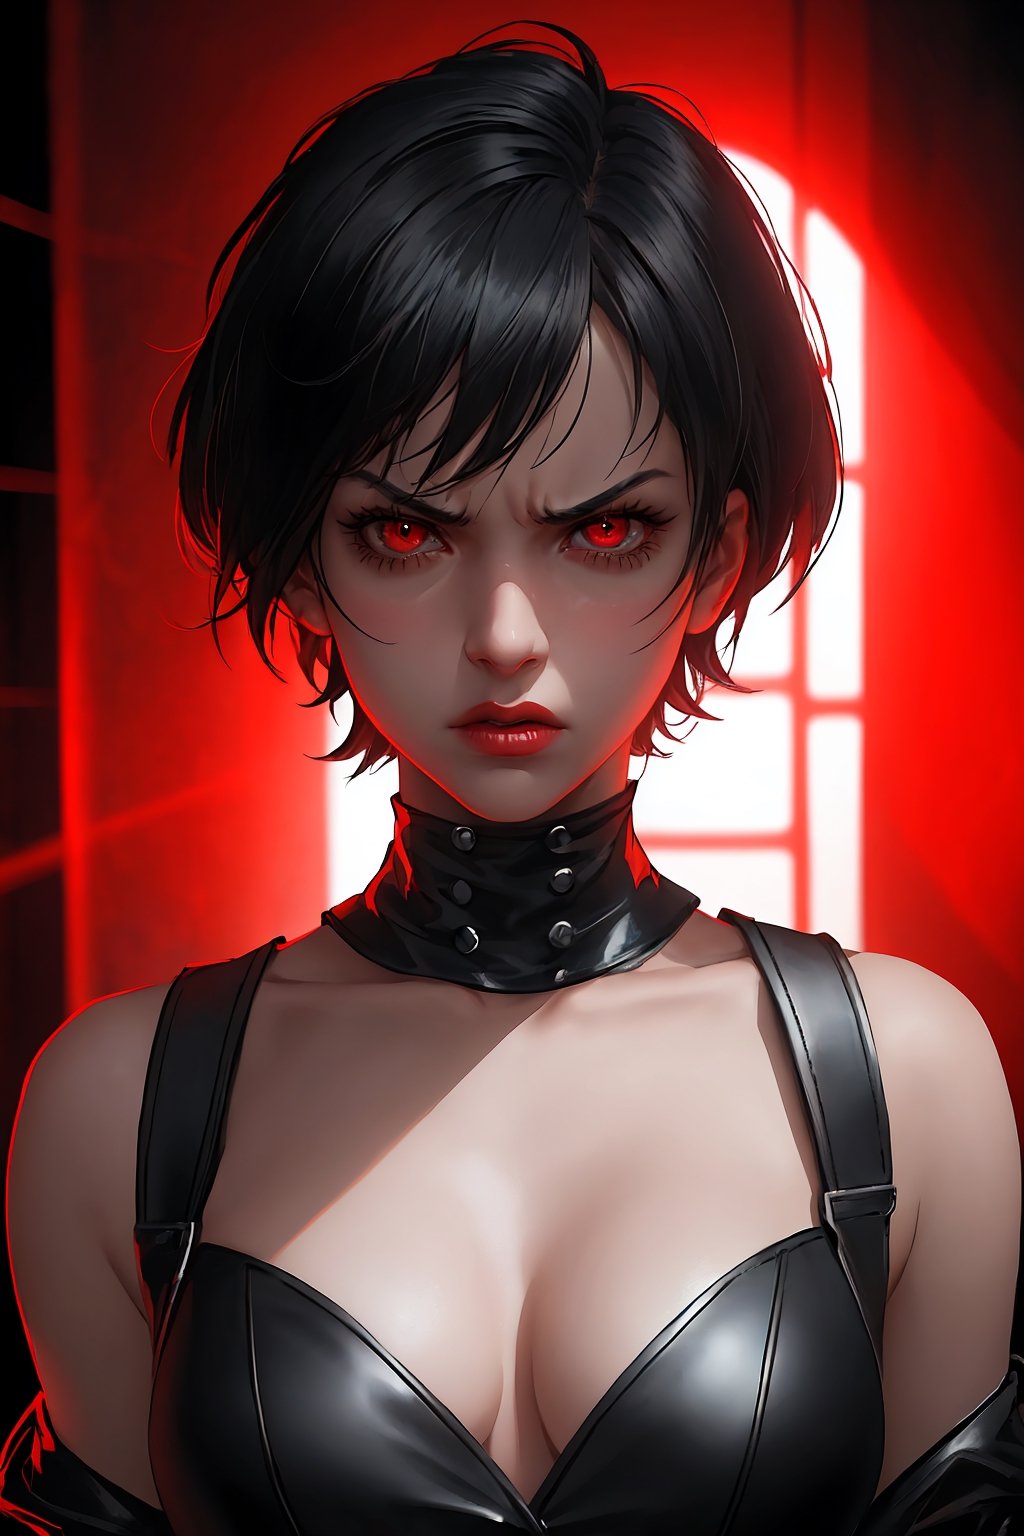  Solo, 1girl, short-hair, black-hair, black assassin dress, red eye, full body, background in a room, full red color light, badass face, katana in a hand, perfect lighting, dark room with red color light,perfect face, perfect body, ,photorealistic, heavy detailed, clear the room objects, angry face but cute 